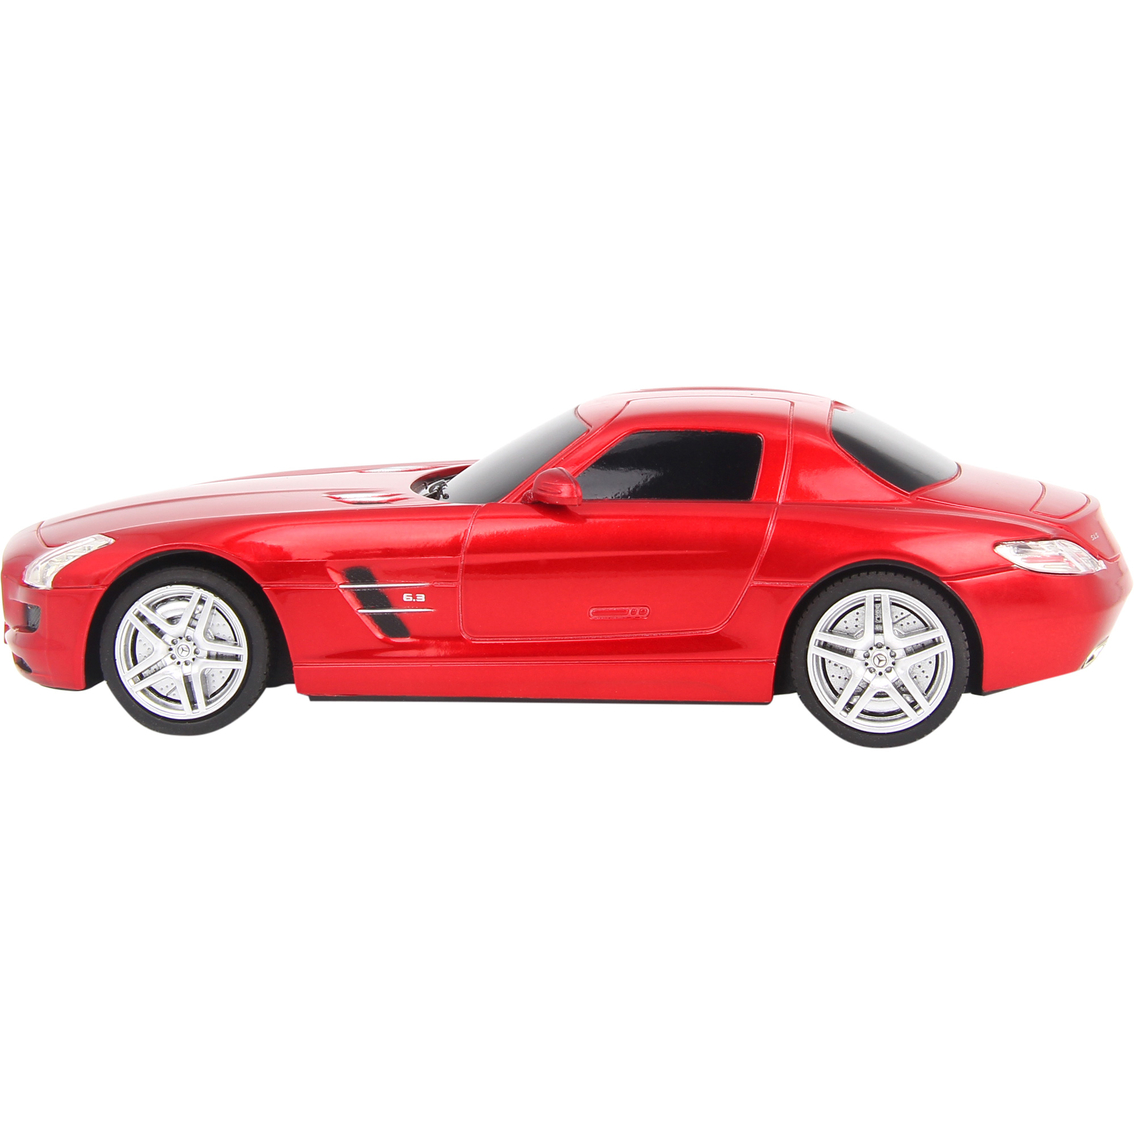 Braha 1:24 Scale Licensed RC Car - Image 4 of 10